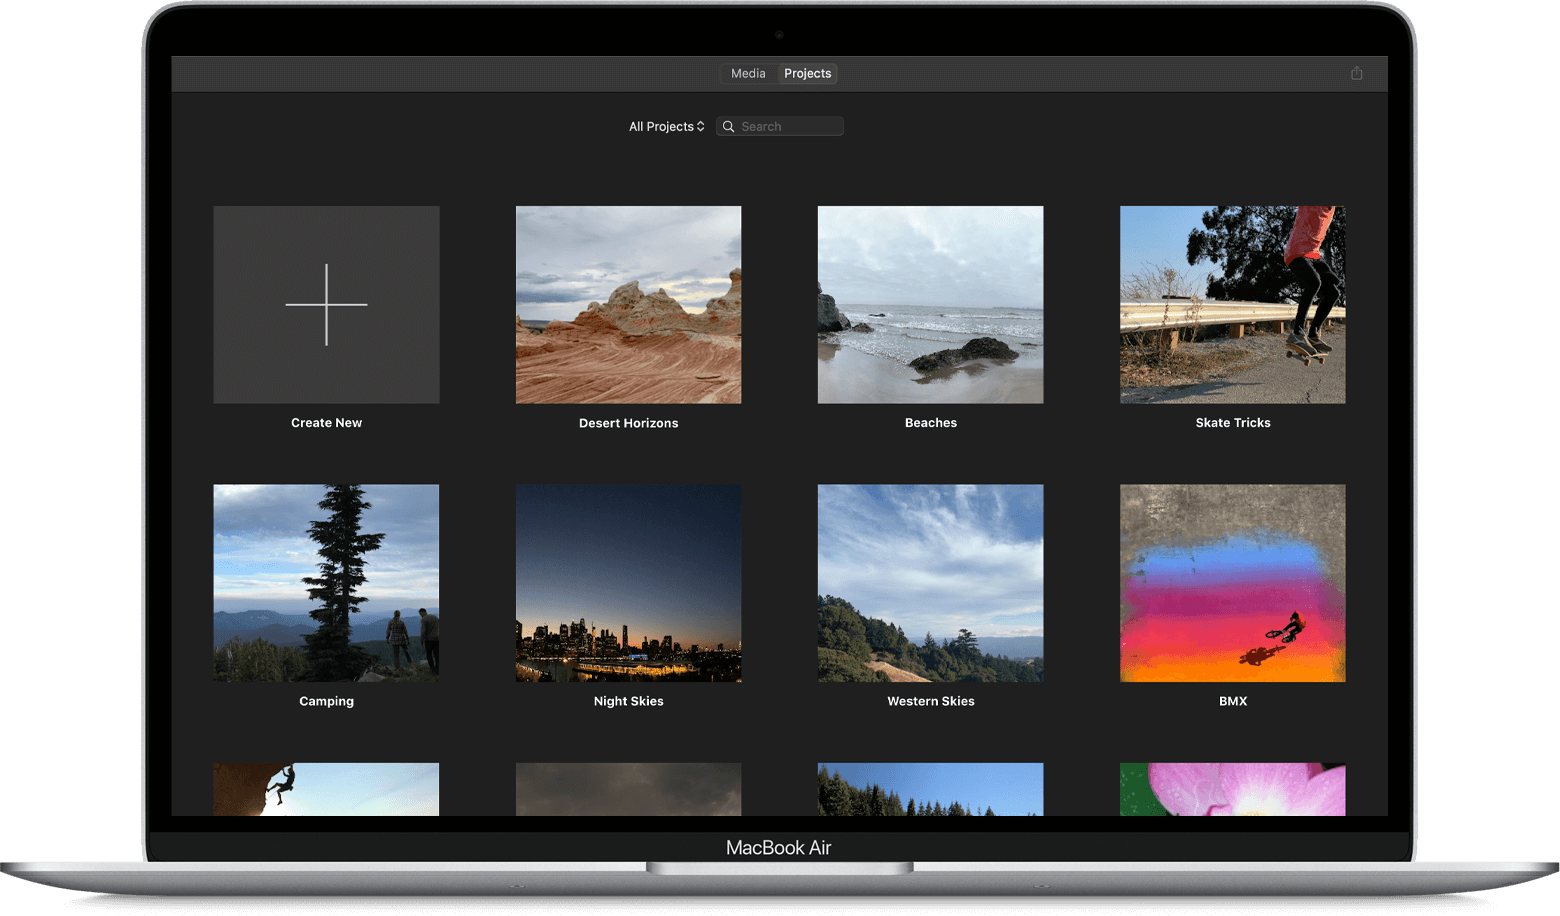 iMovie on Mac Projects gallery screen